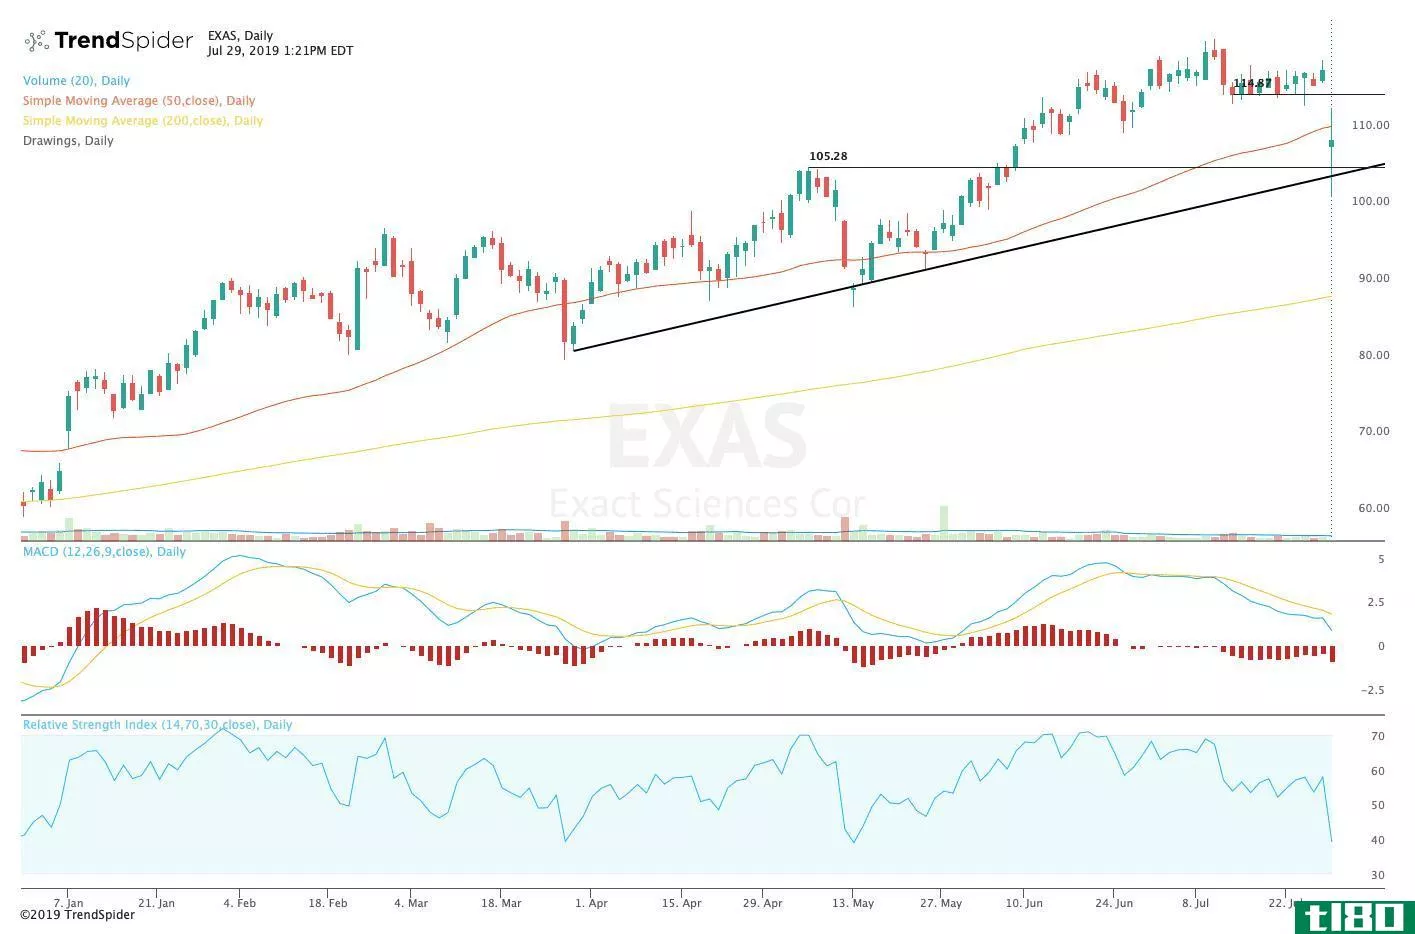 Chart showing the share price performance of Exact Sciences Corporation (EXAS)